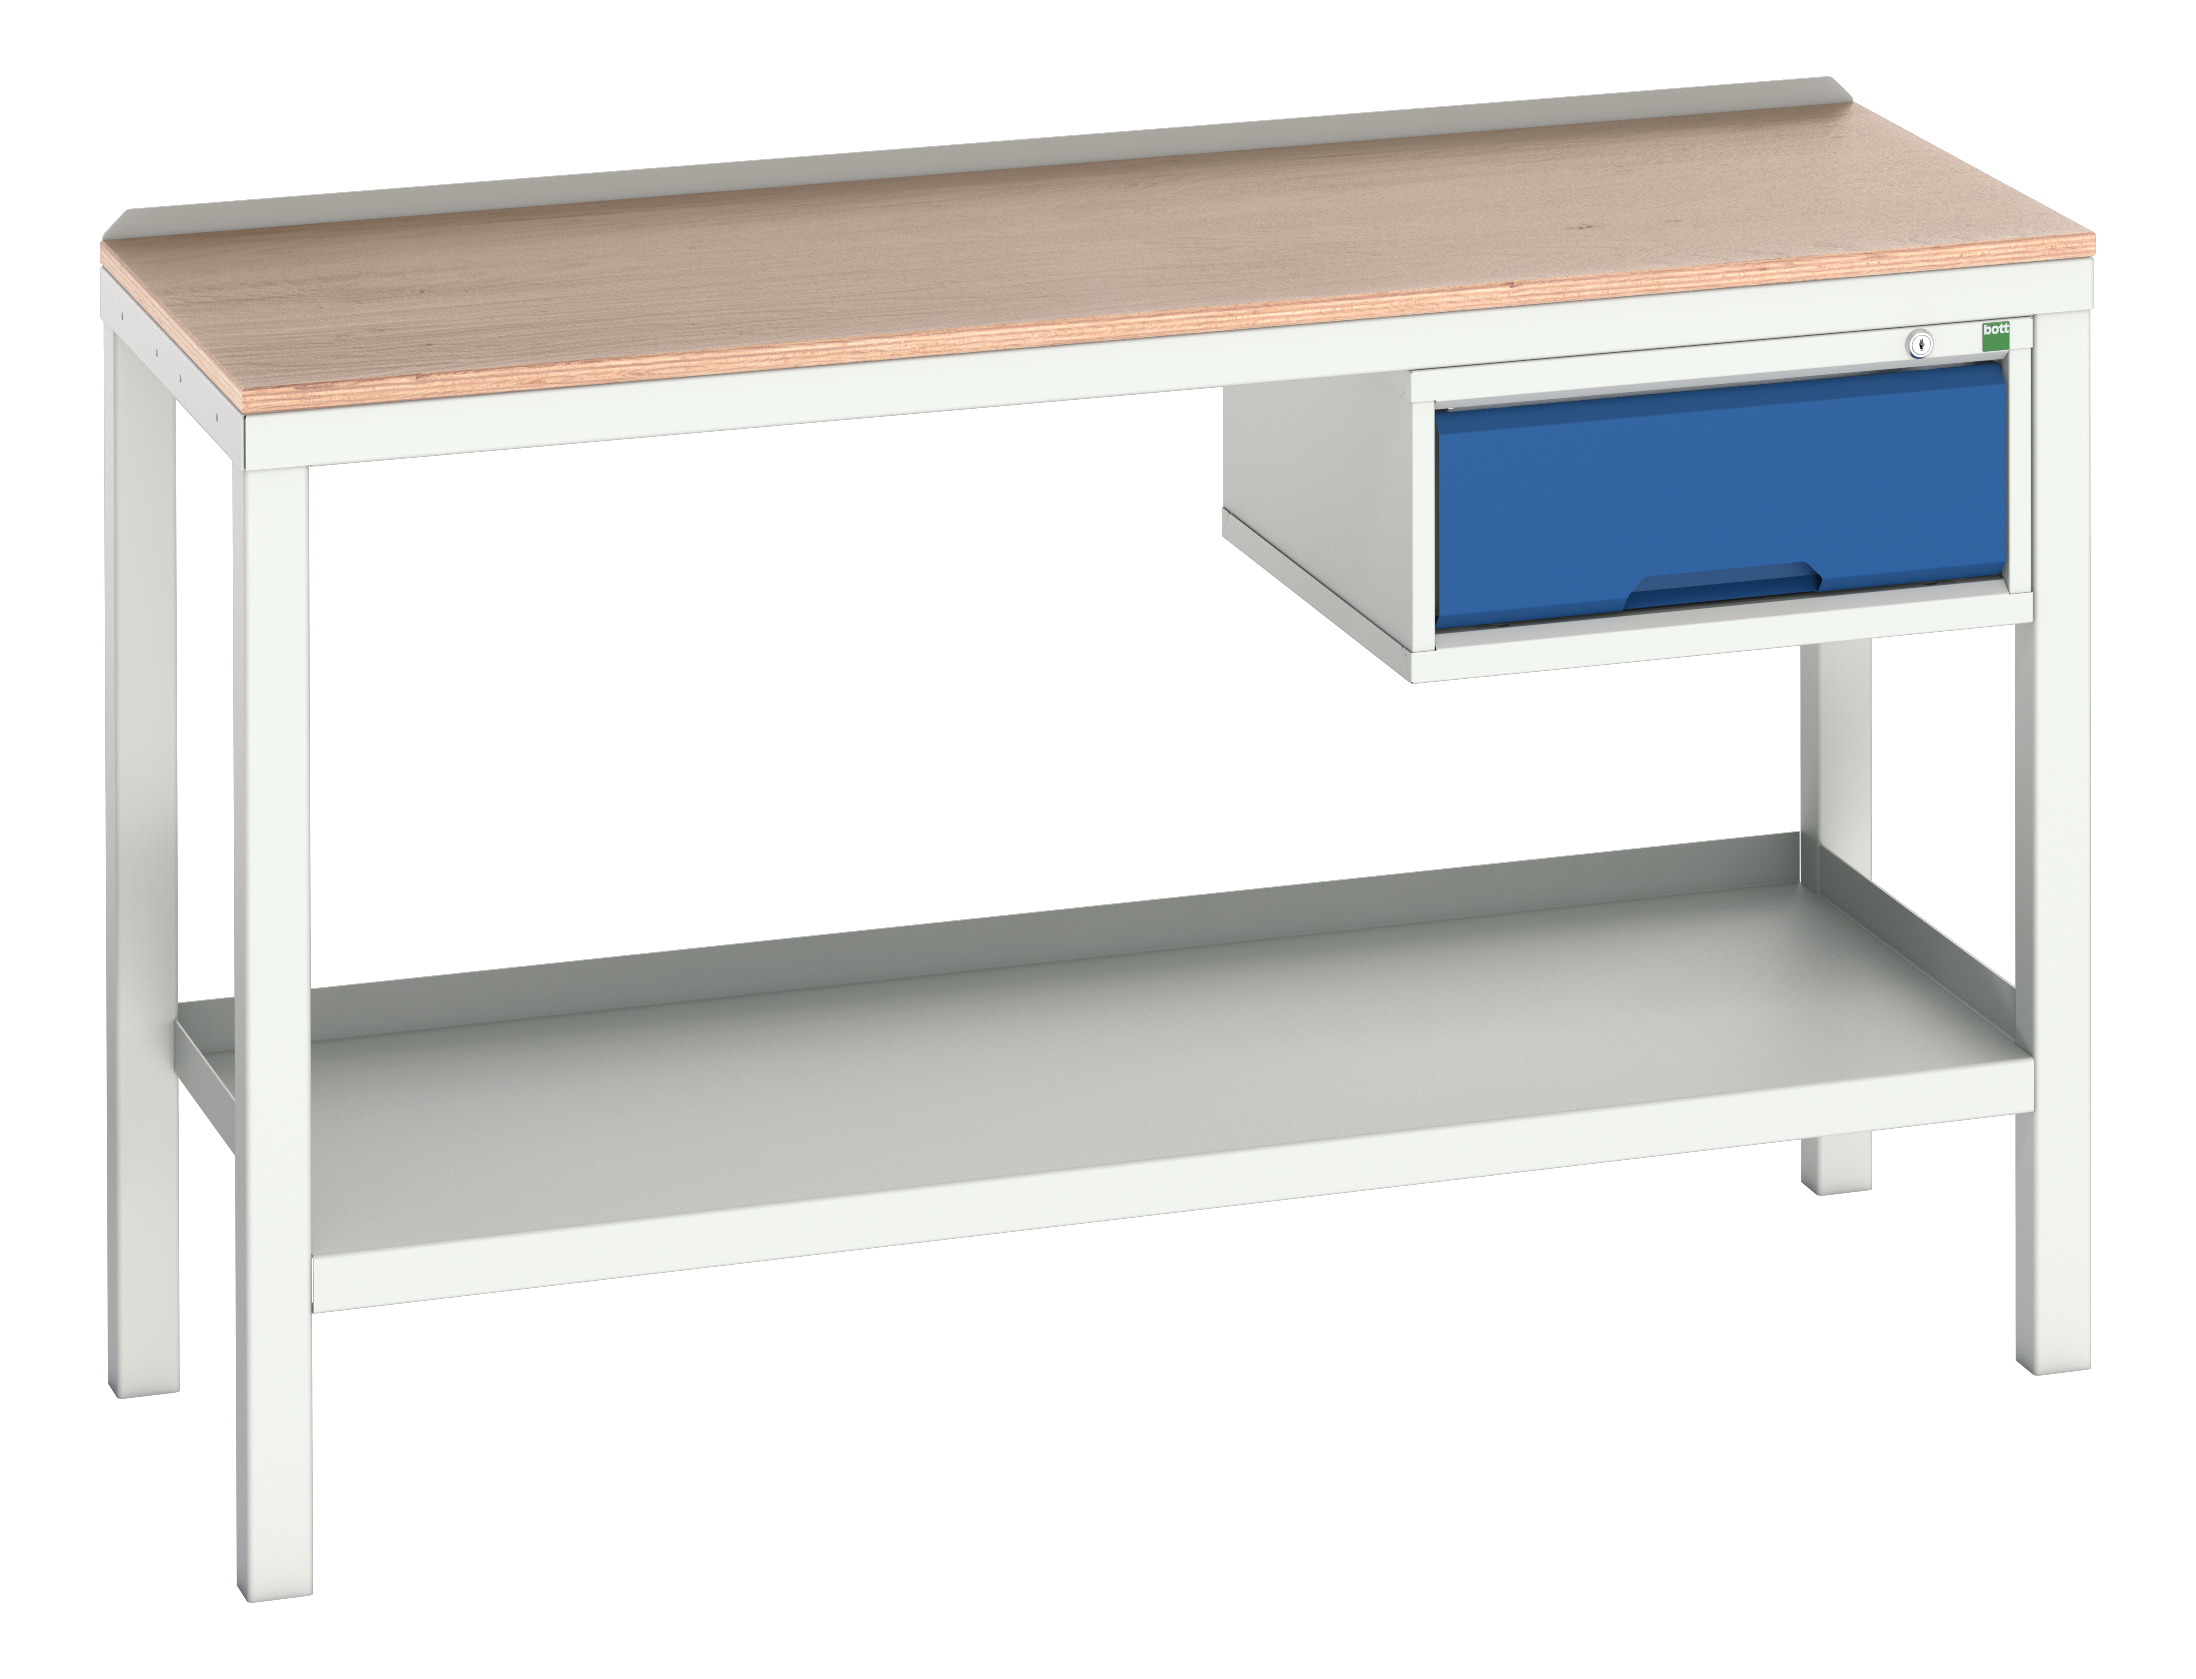 Bott Verso Welded Bench With 1 Drawer Cabinet - 16922605.11